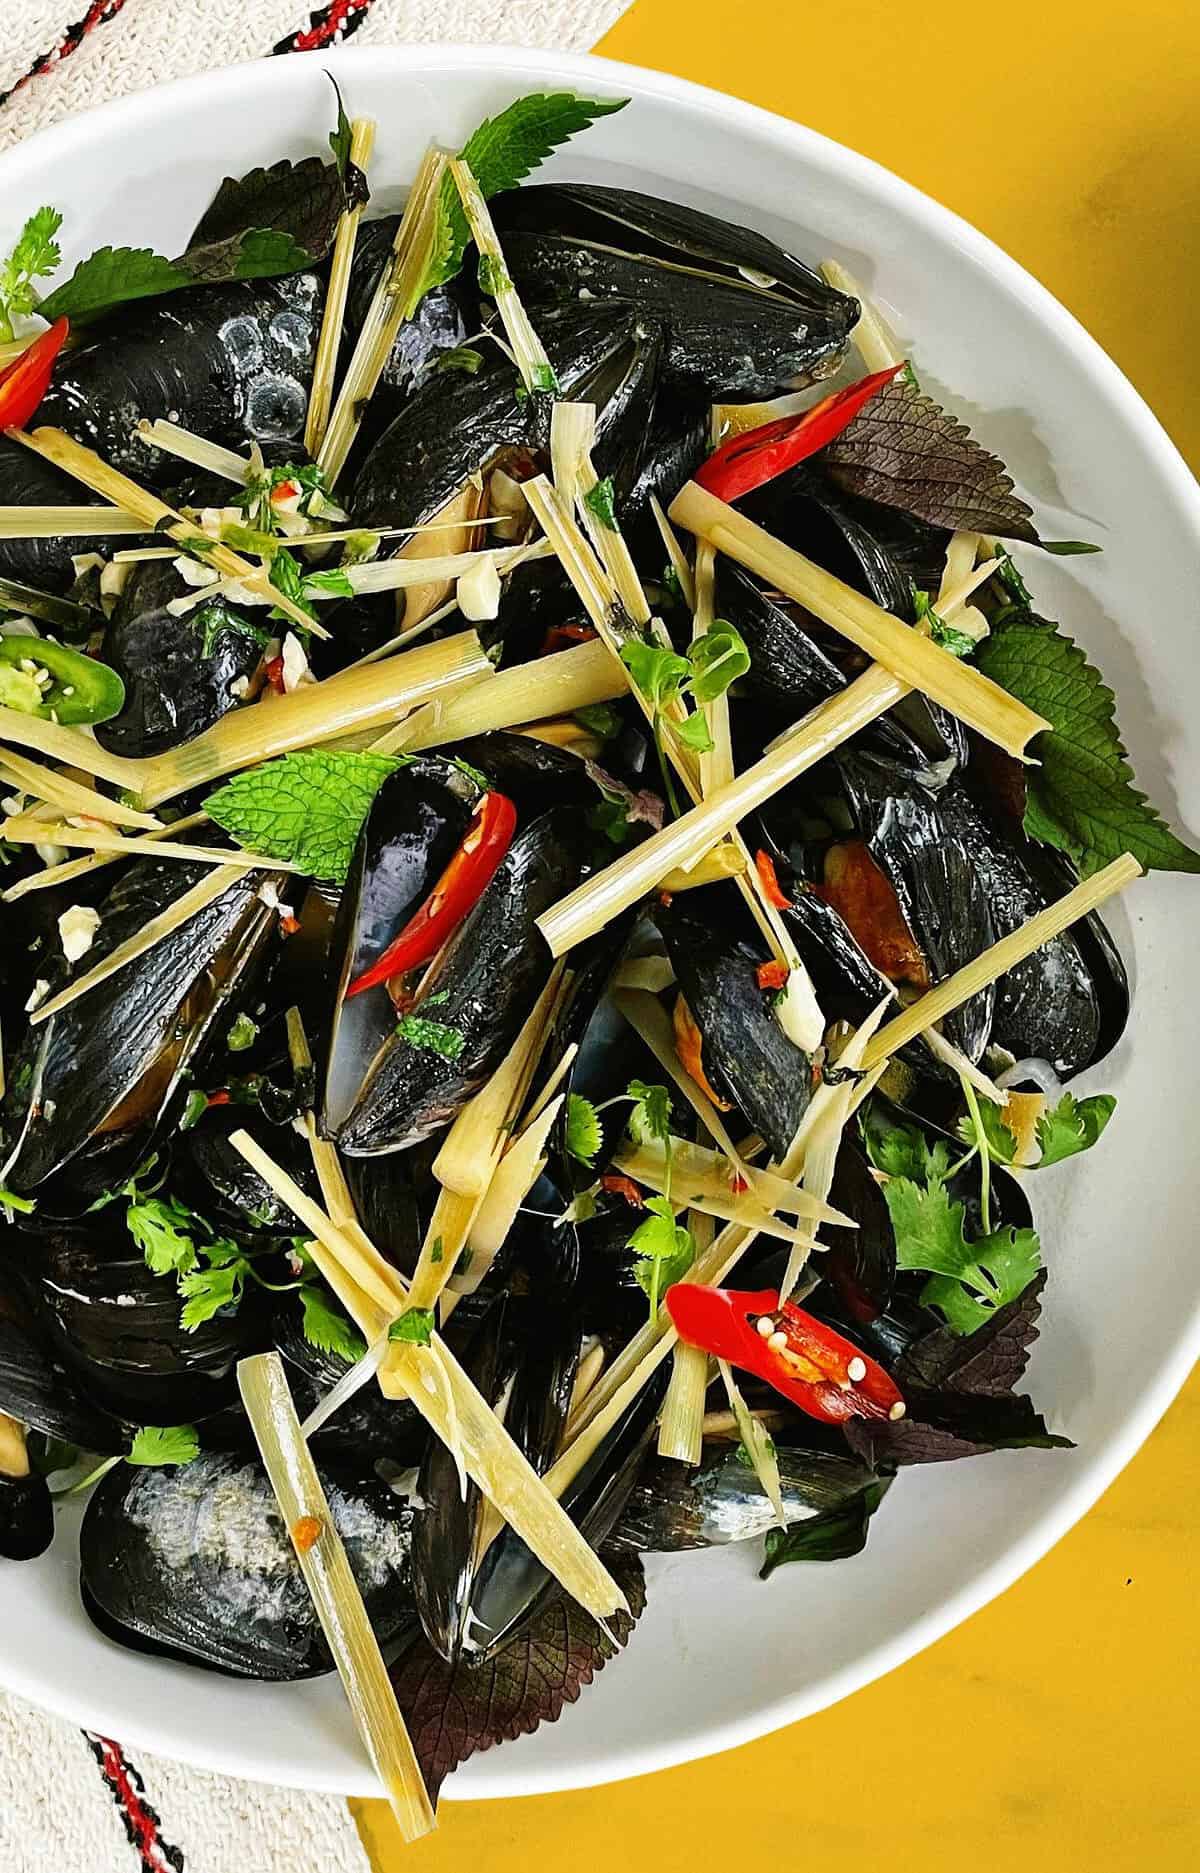  Get your chopsticks ready to savor each and every bite of these succulent mussels